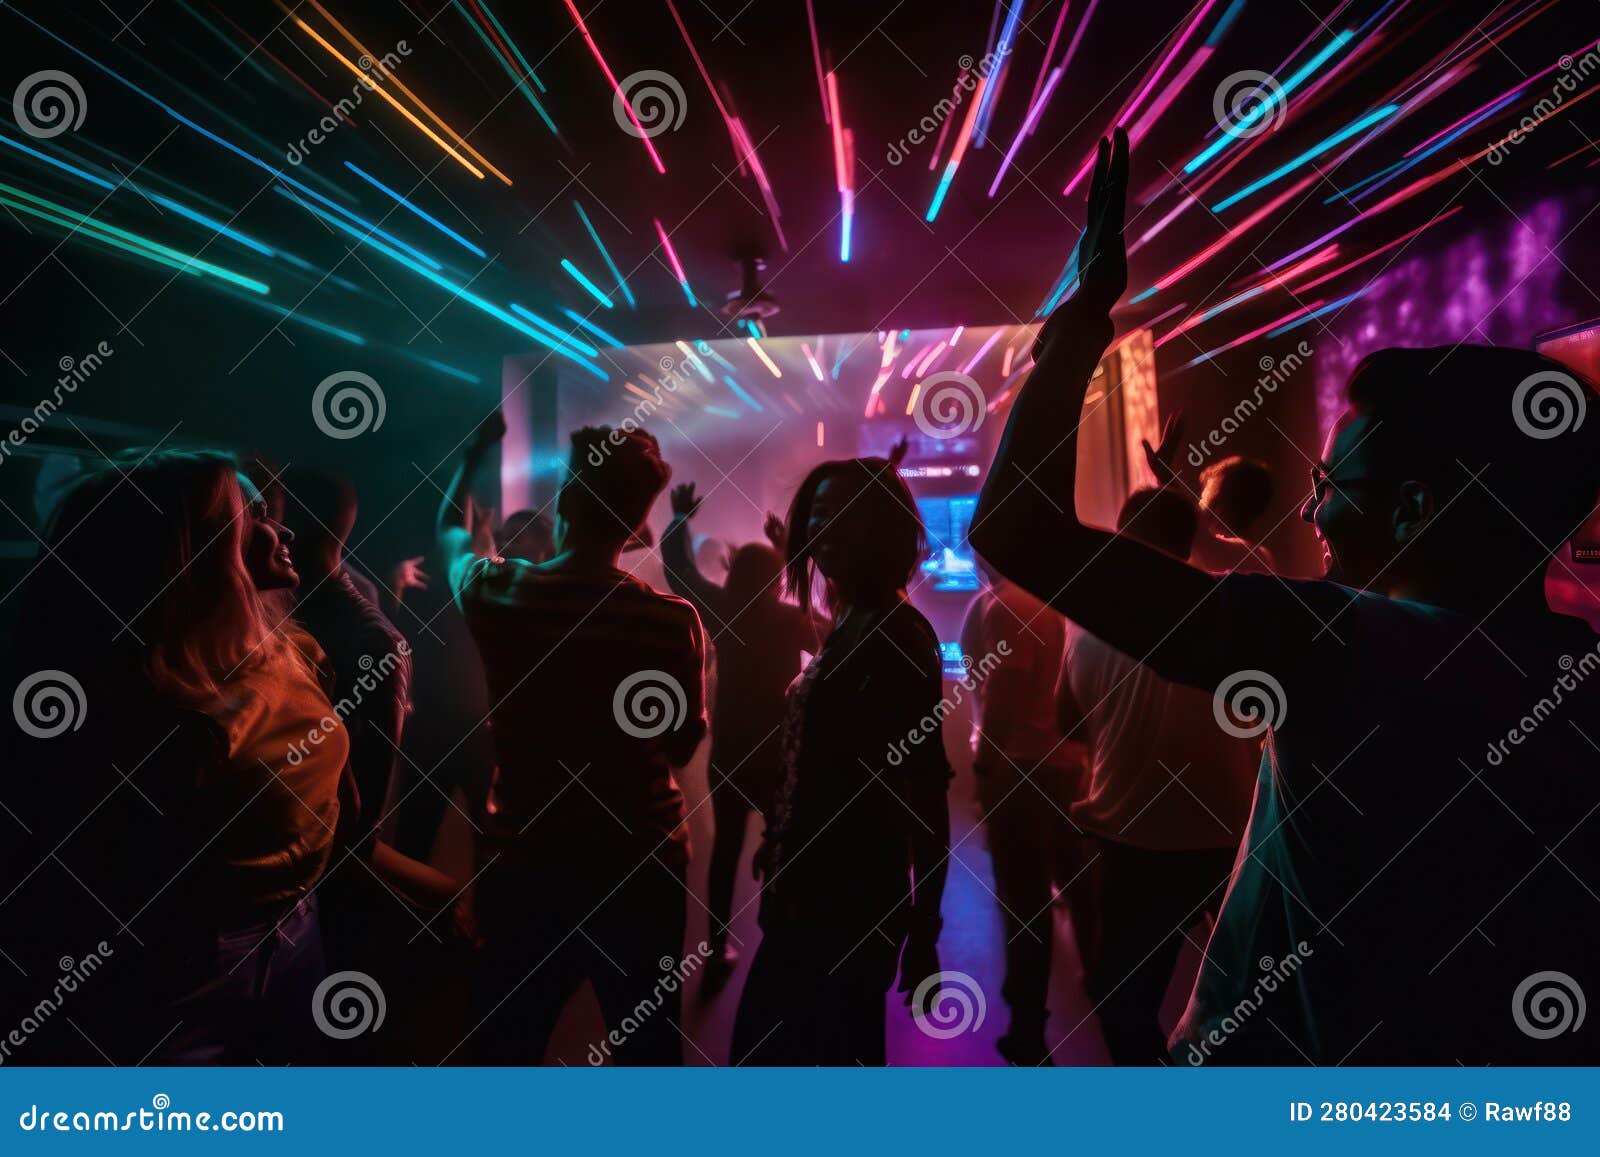 Clubbing, Night Out for Dance and Fun, Silhouettes of People Dancing in ...